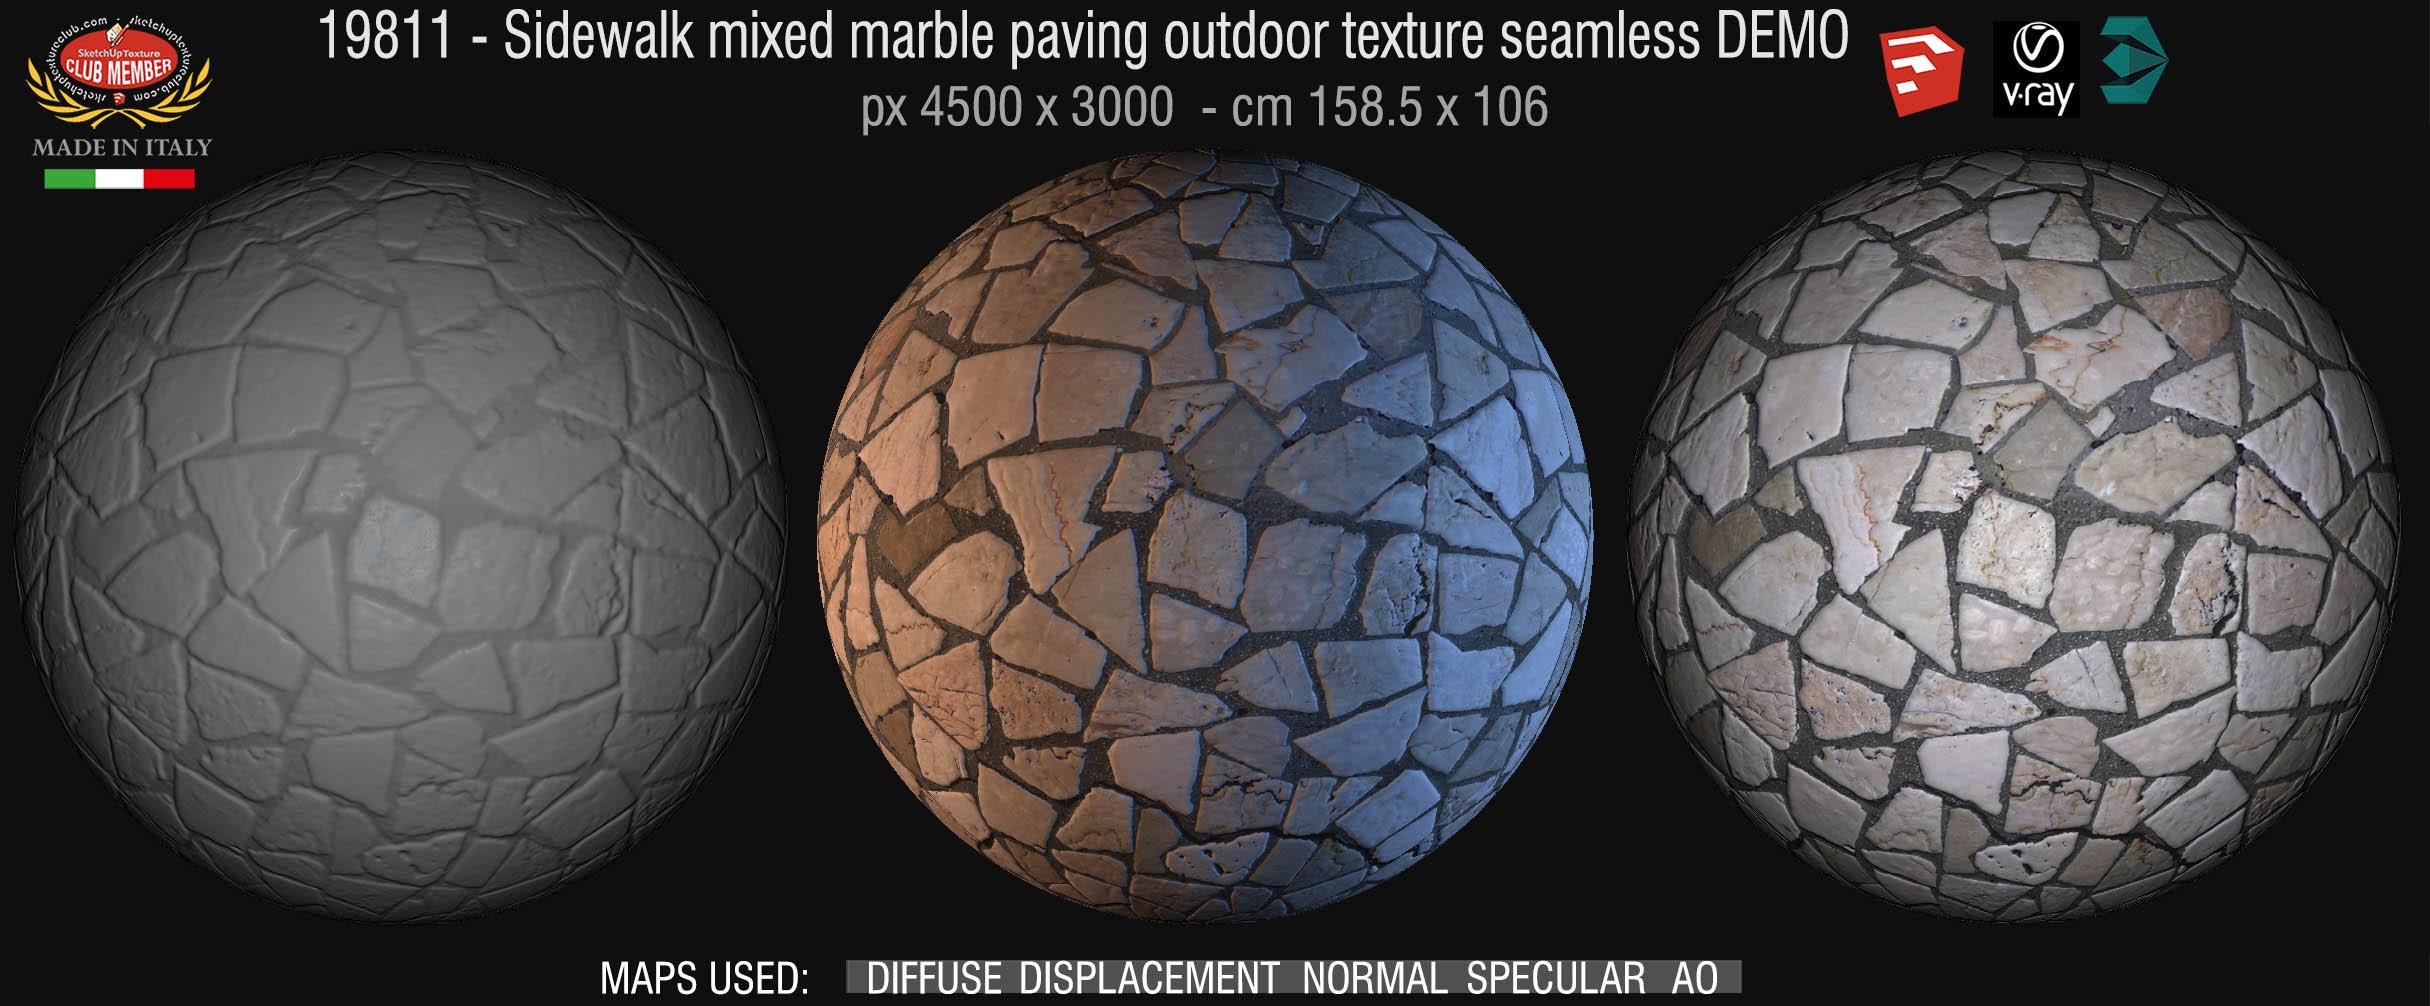 19811 sidewalk mixed marble paving outdoor texture + maps DEMO